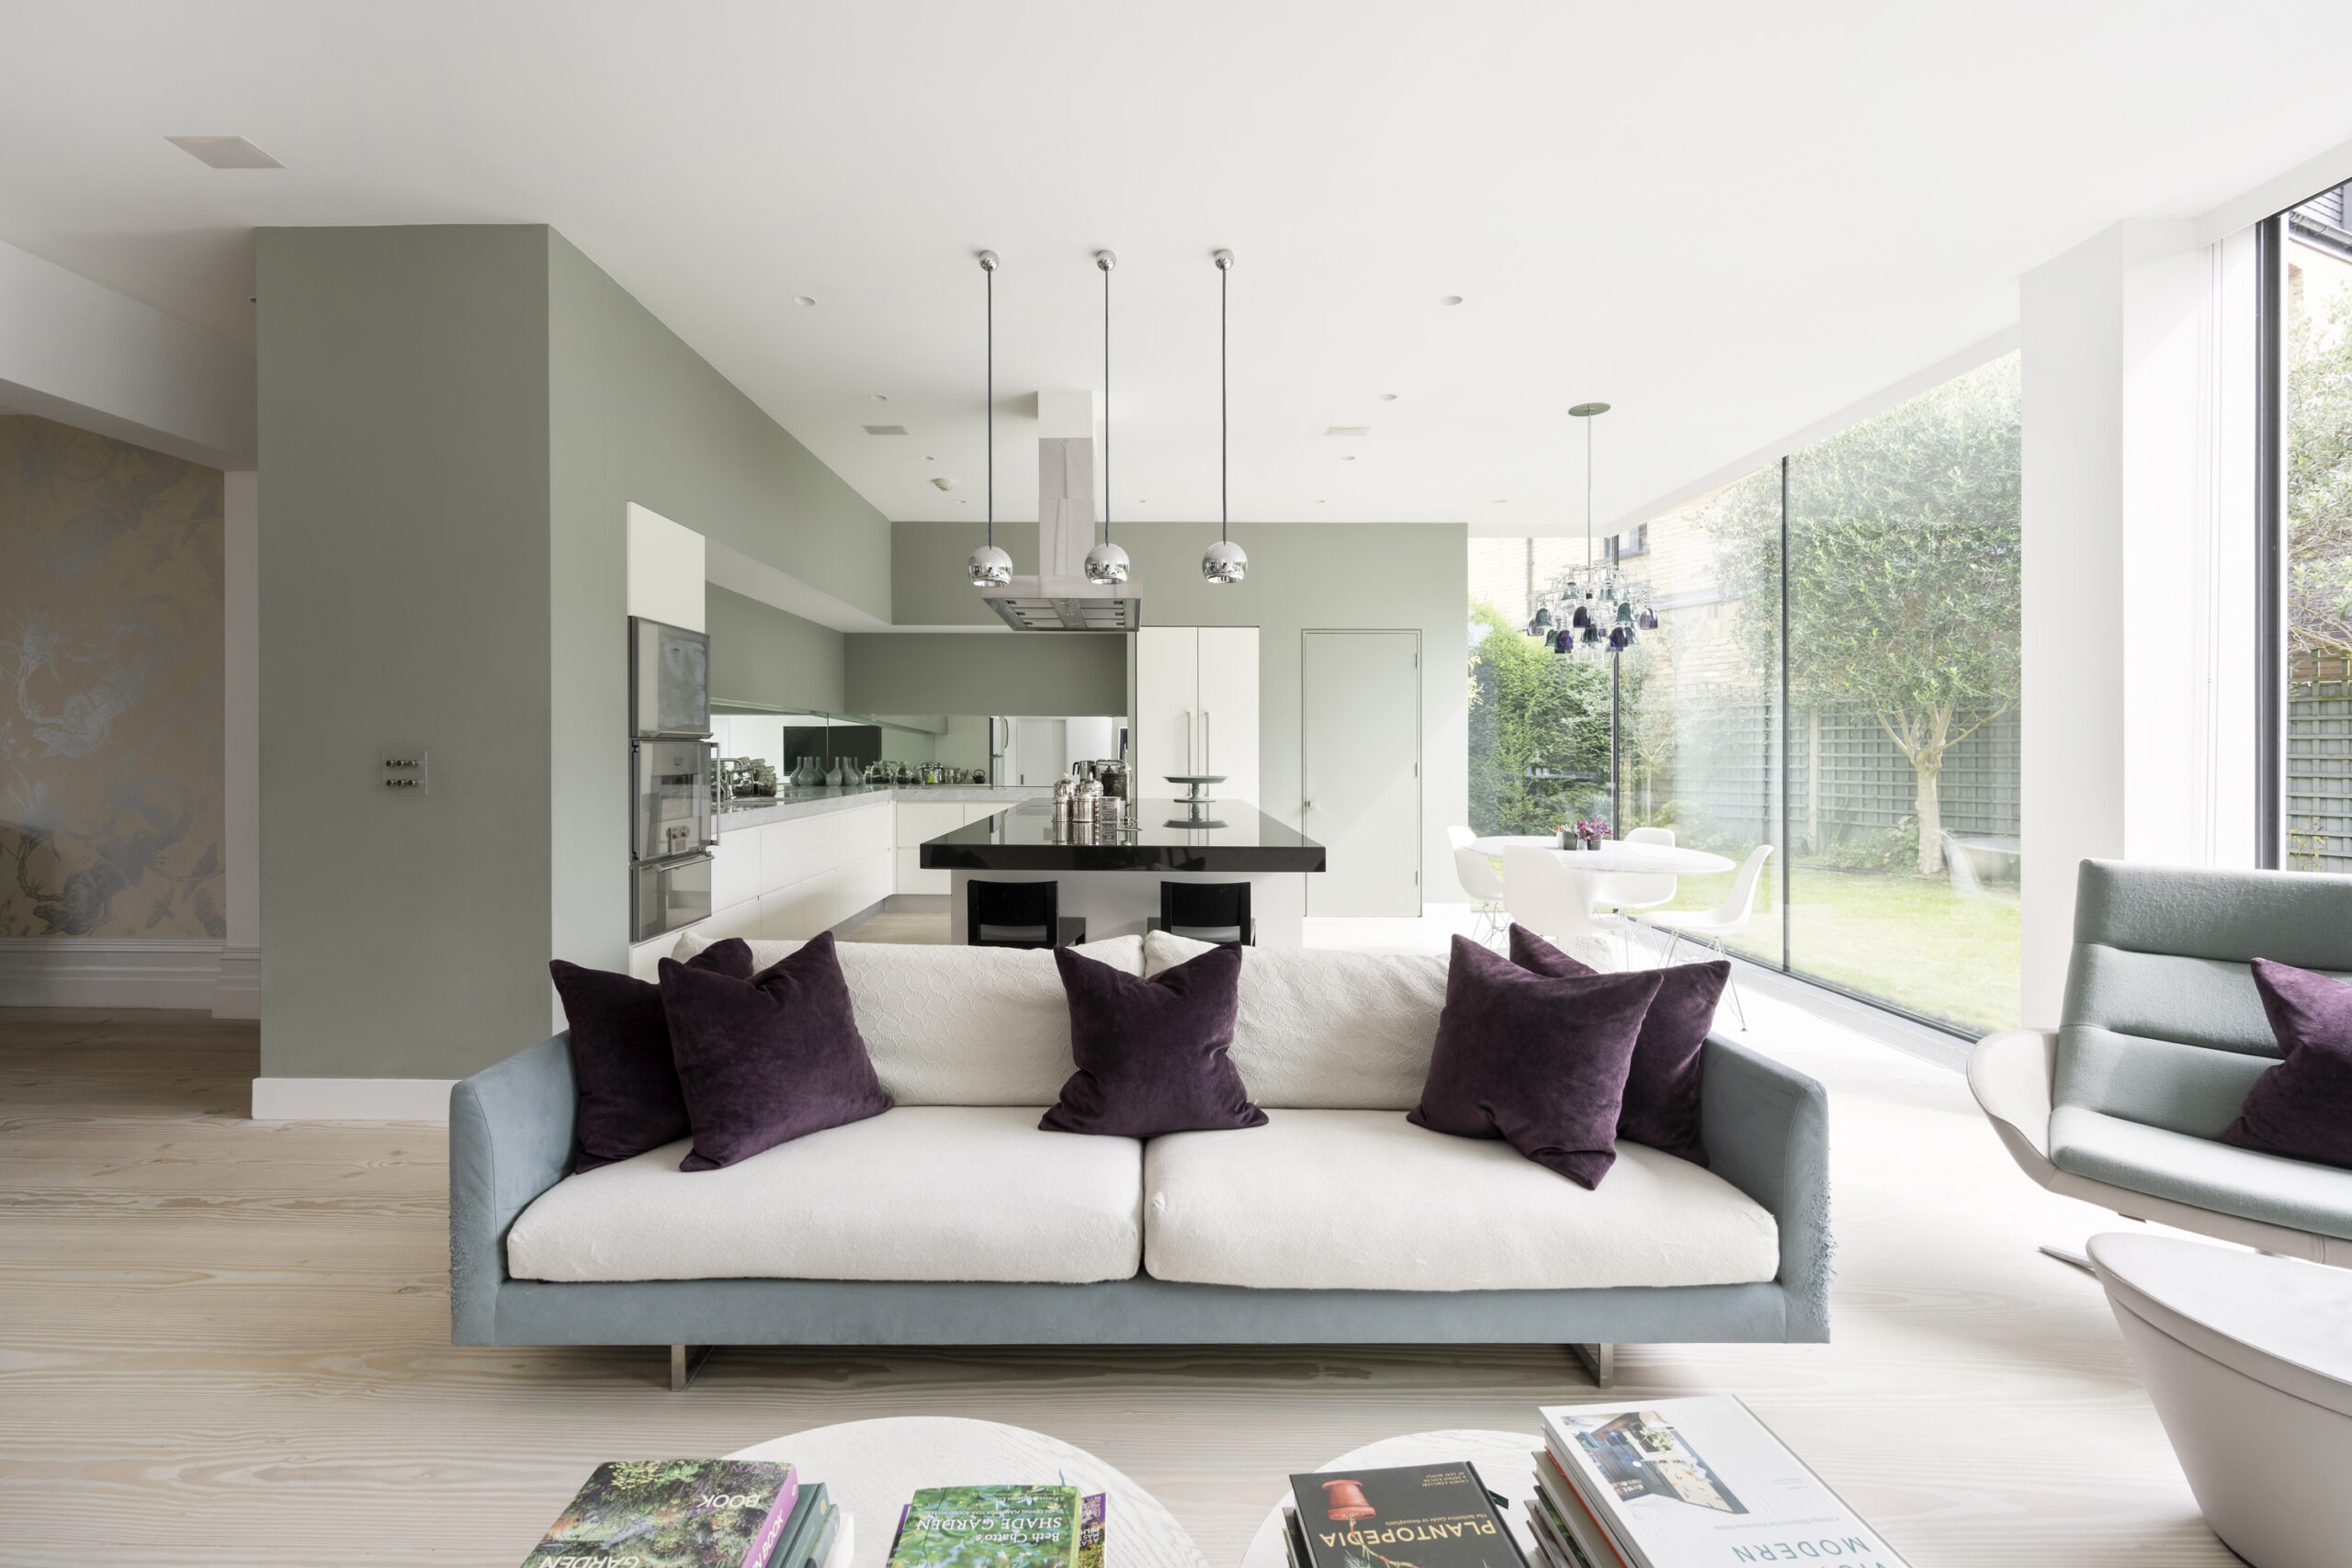 Open-plan living room of a luxury house for sale in Chiswick